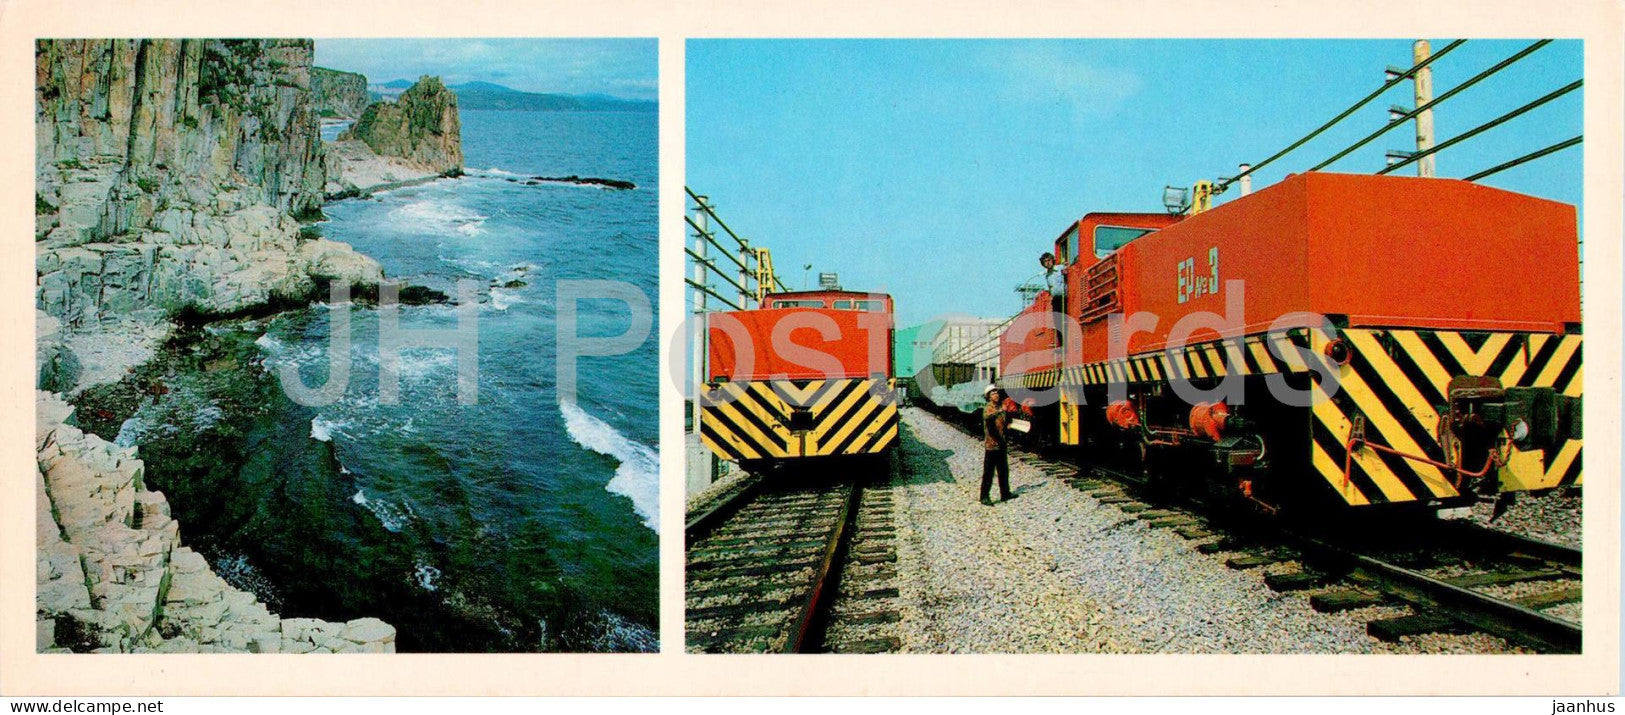 Vostochny Port (Eastern Port) - electric locomotives deliver trains with coal - train - 1982 - Russia USSR - unused